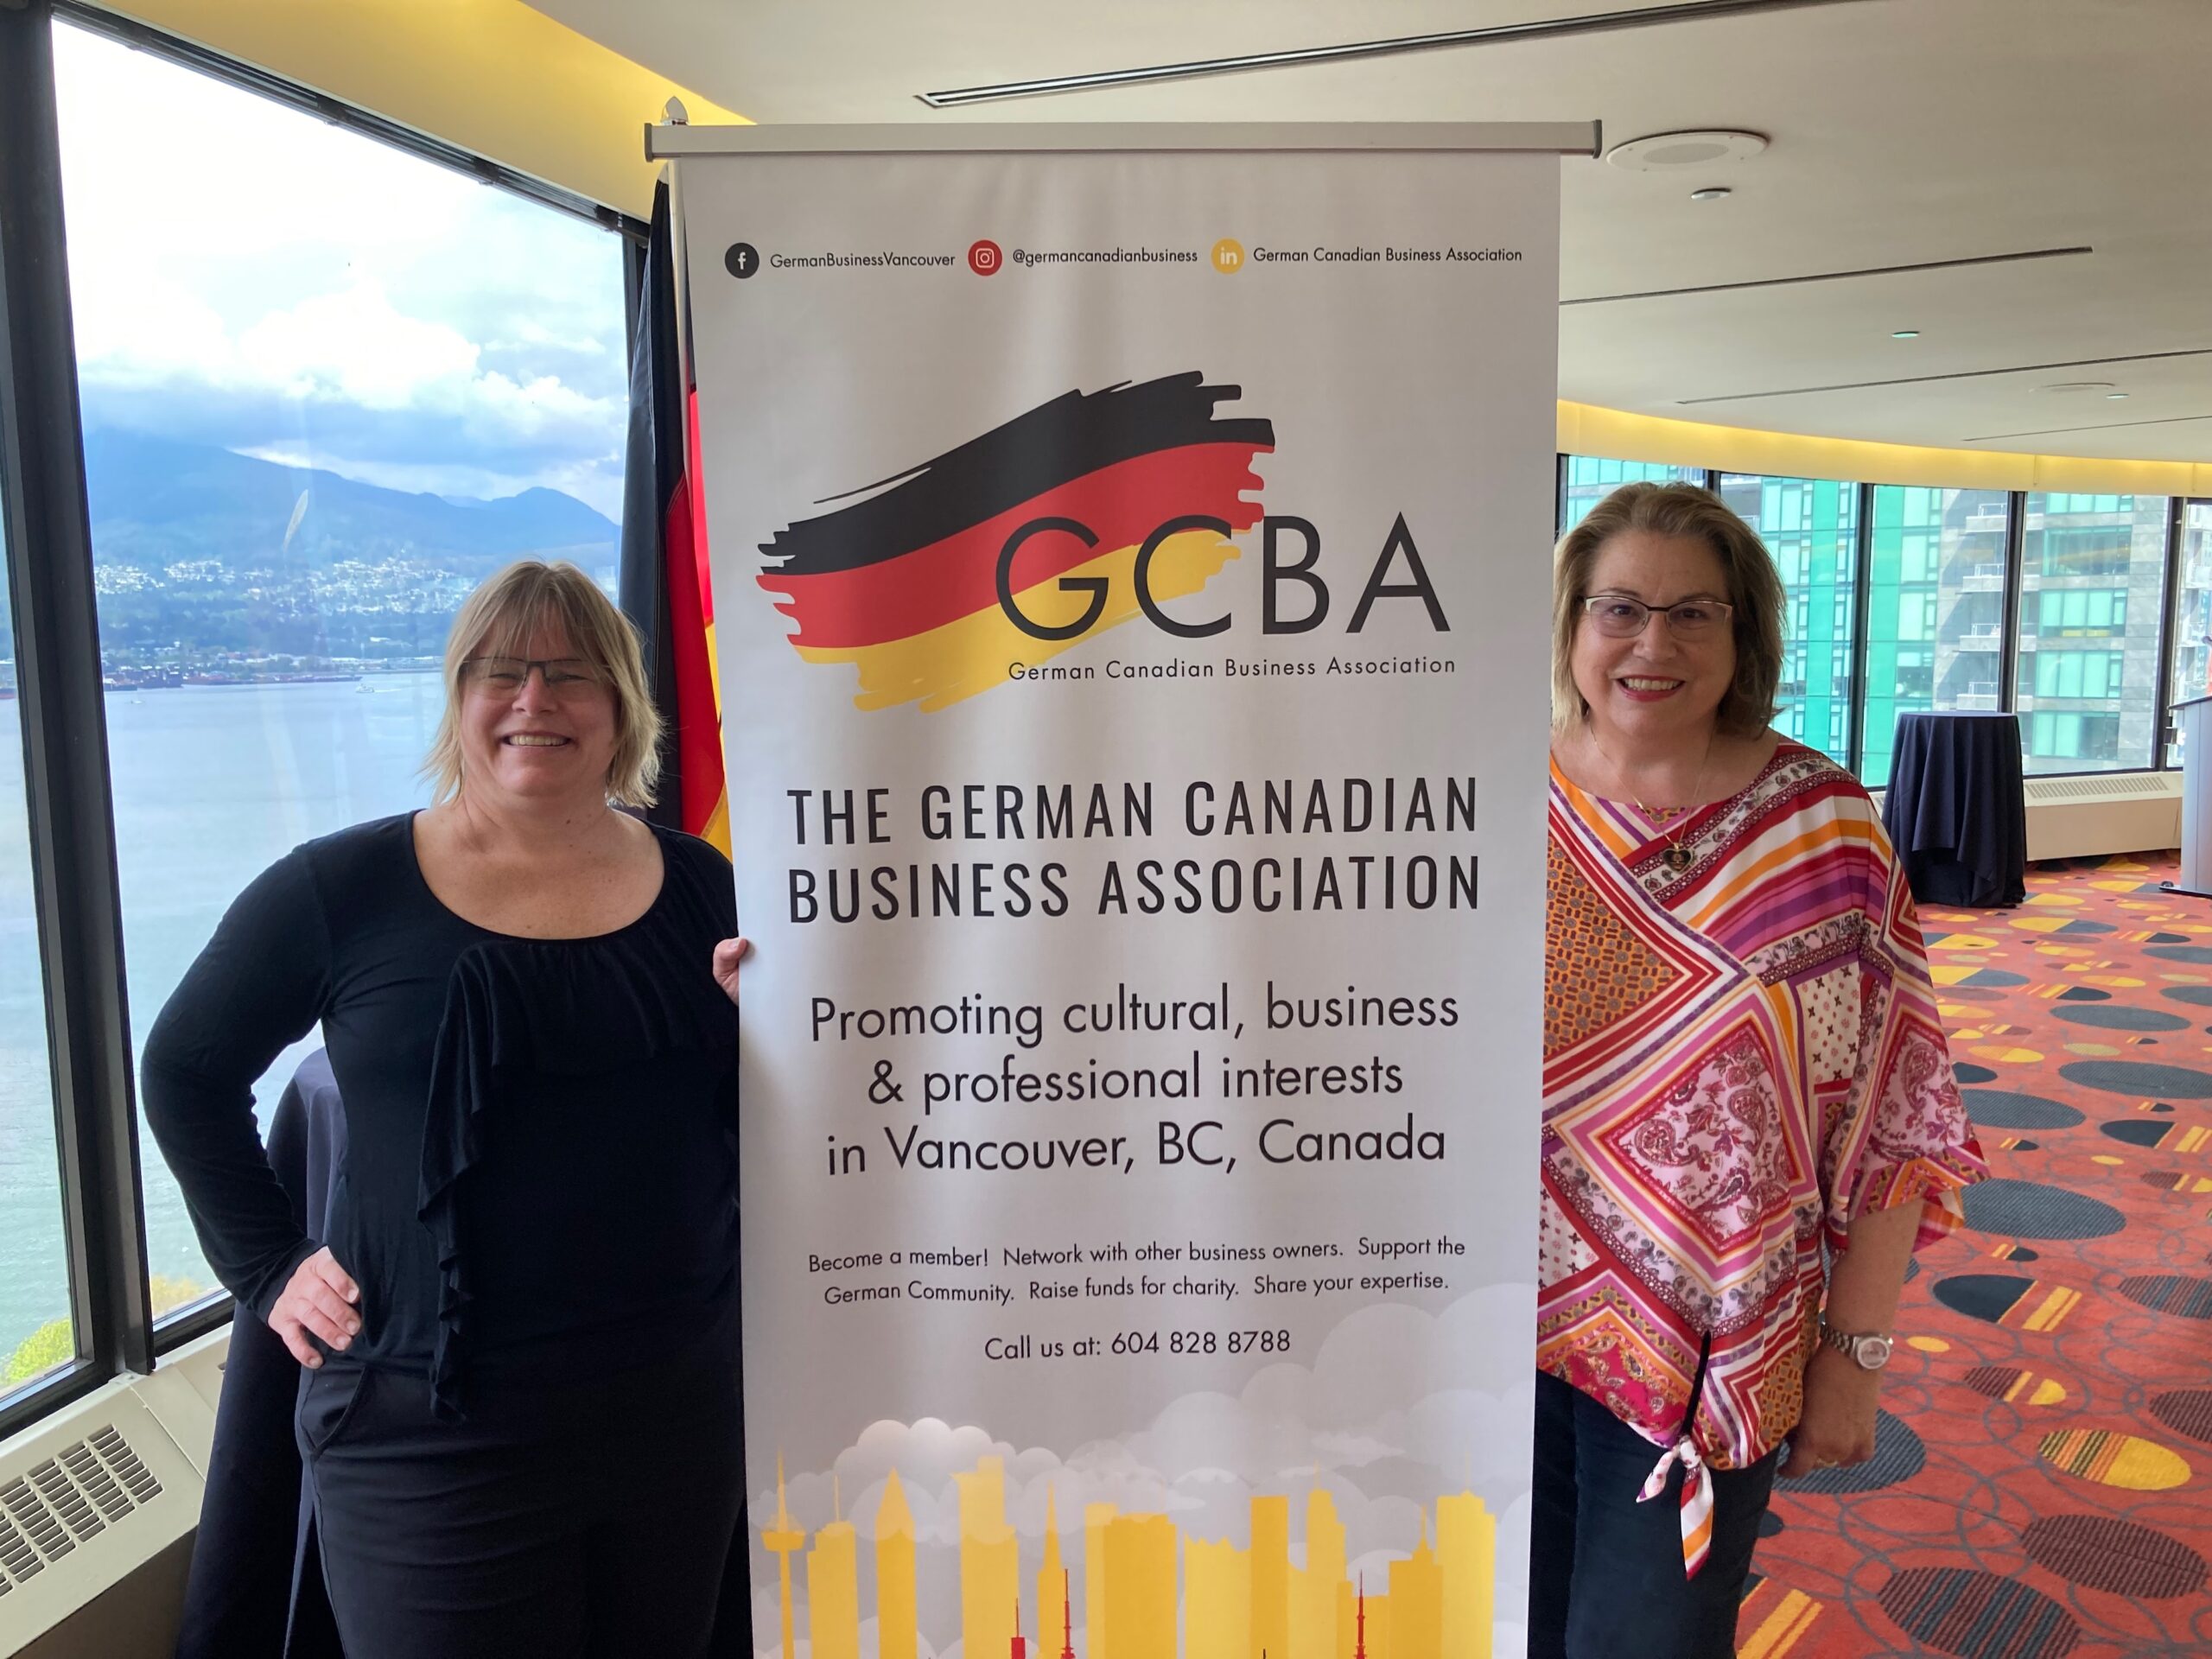 Beatrice Schreiber Recognized for Outstanding Leadership and Contribution to the German Canadian Business Community